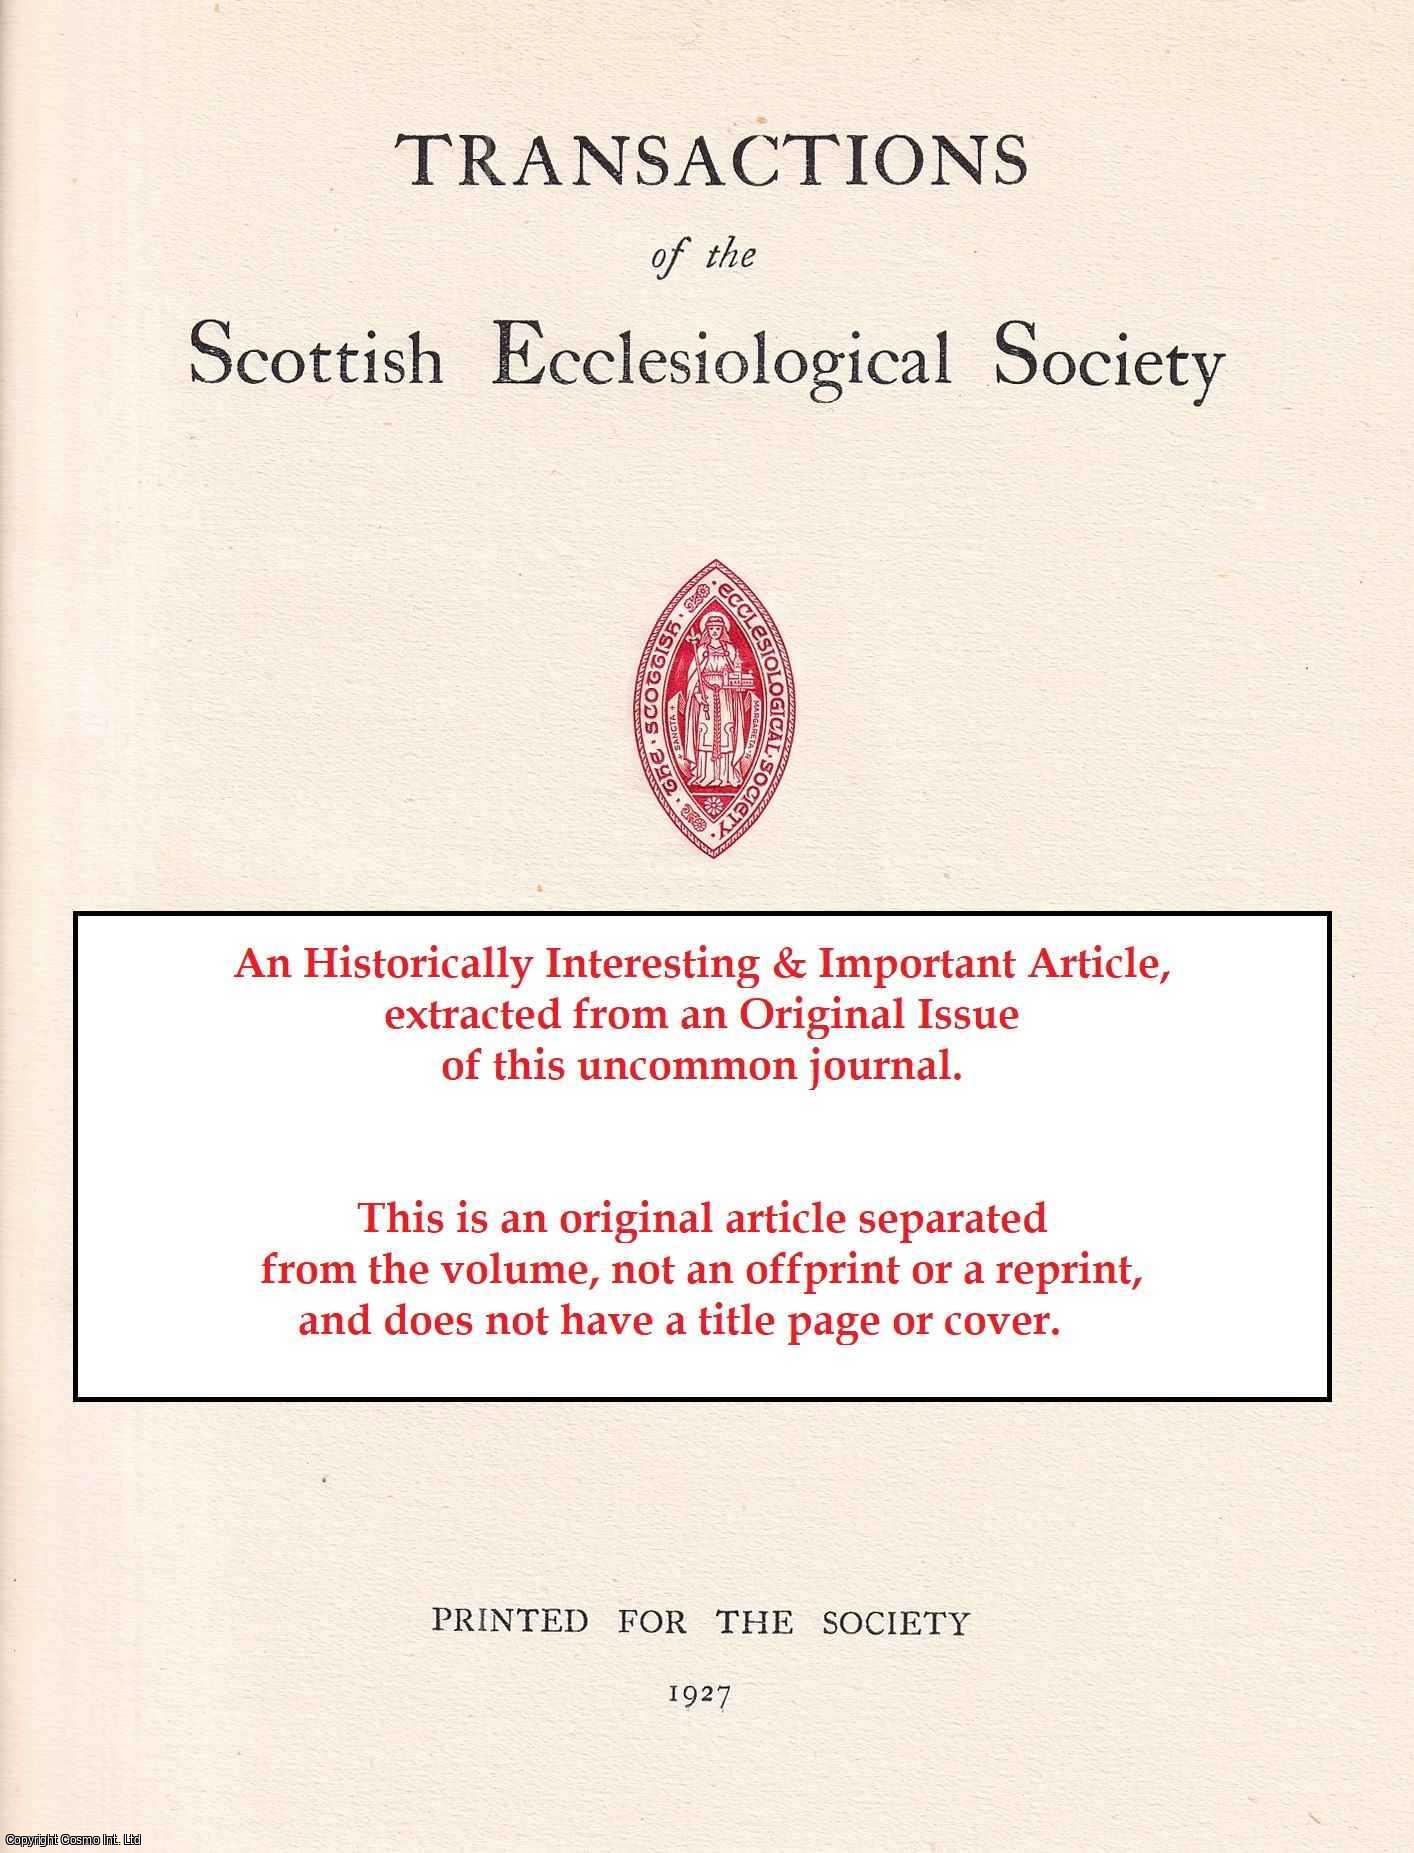 James Wilkie - The Ecclesiology and History of Inveresk. An original article from the Transactions of the Scottish Ecclesiological Society, 1916.